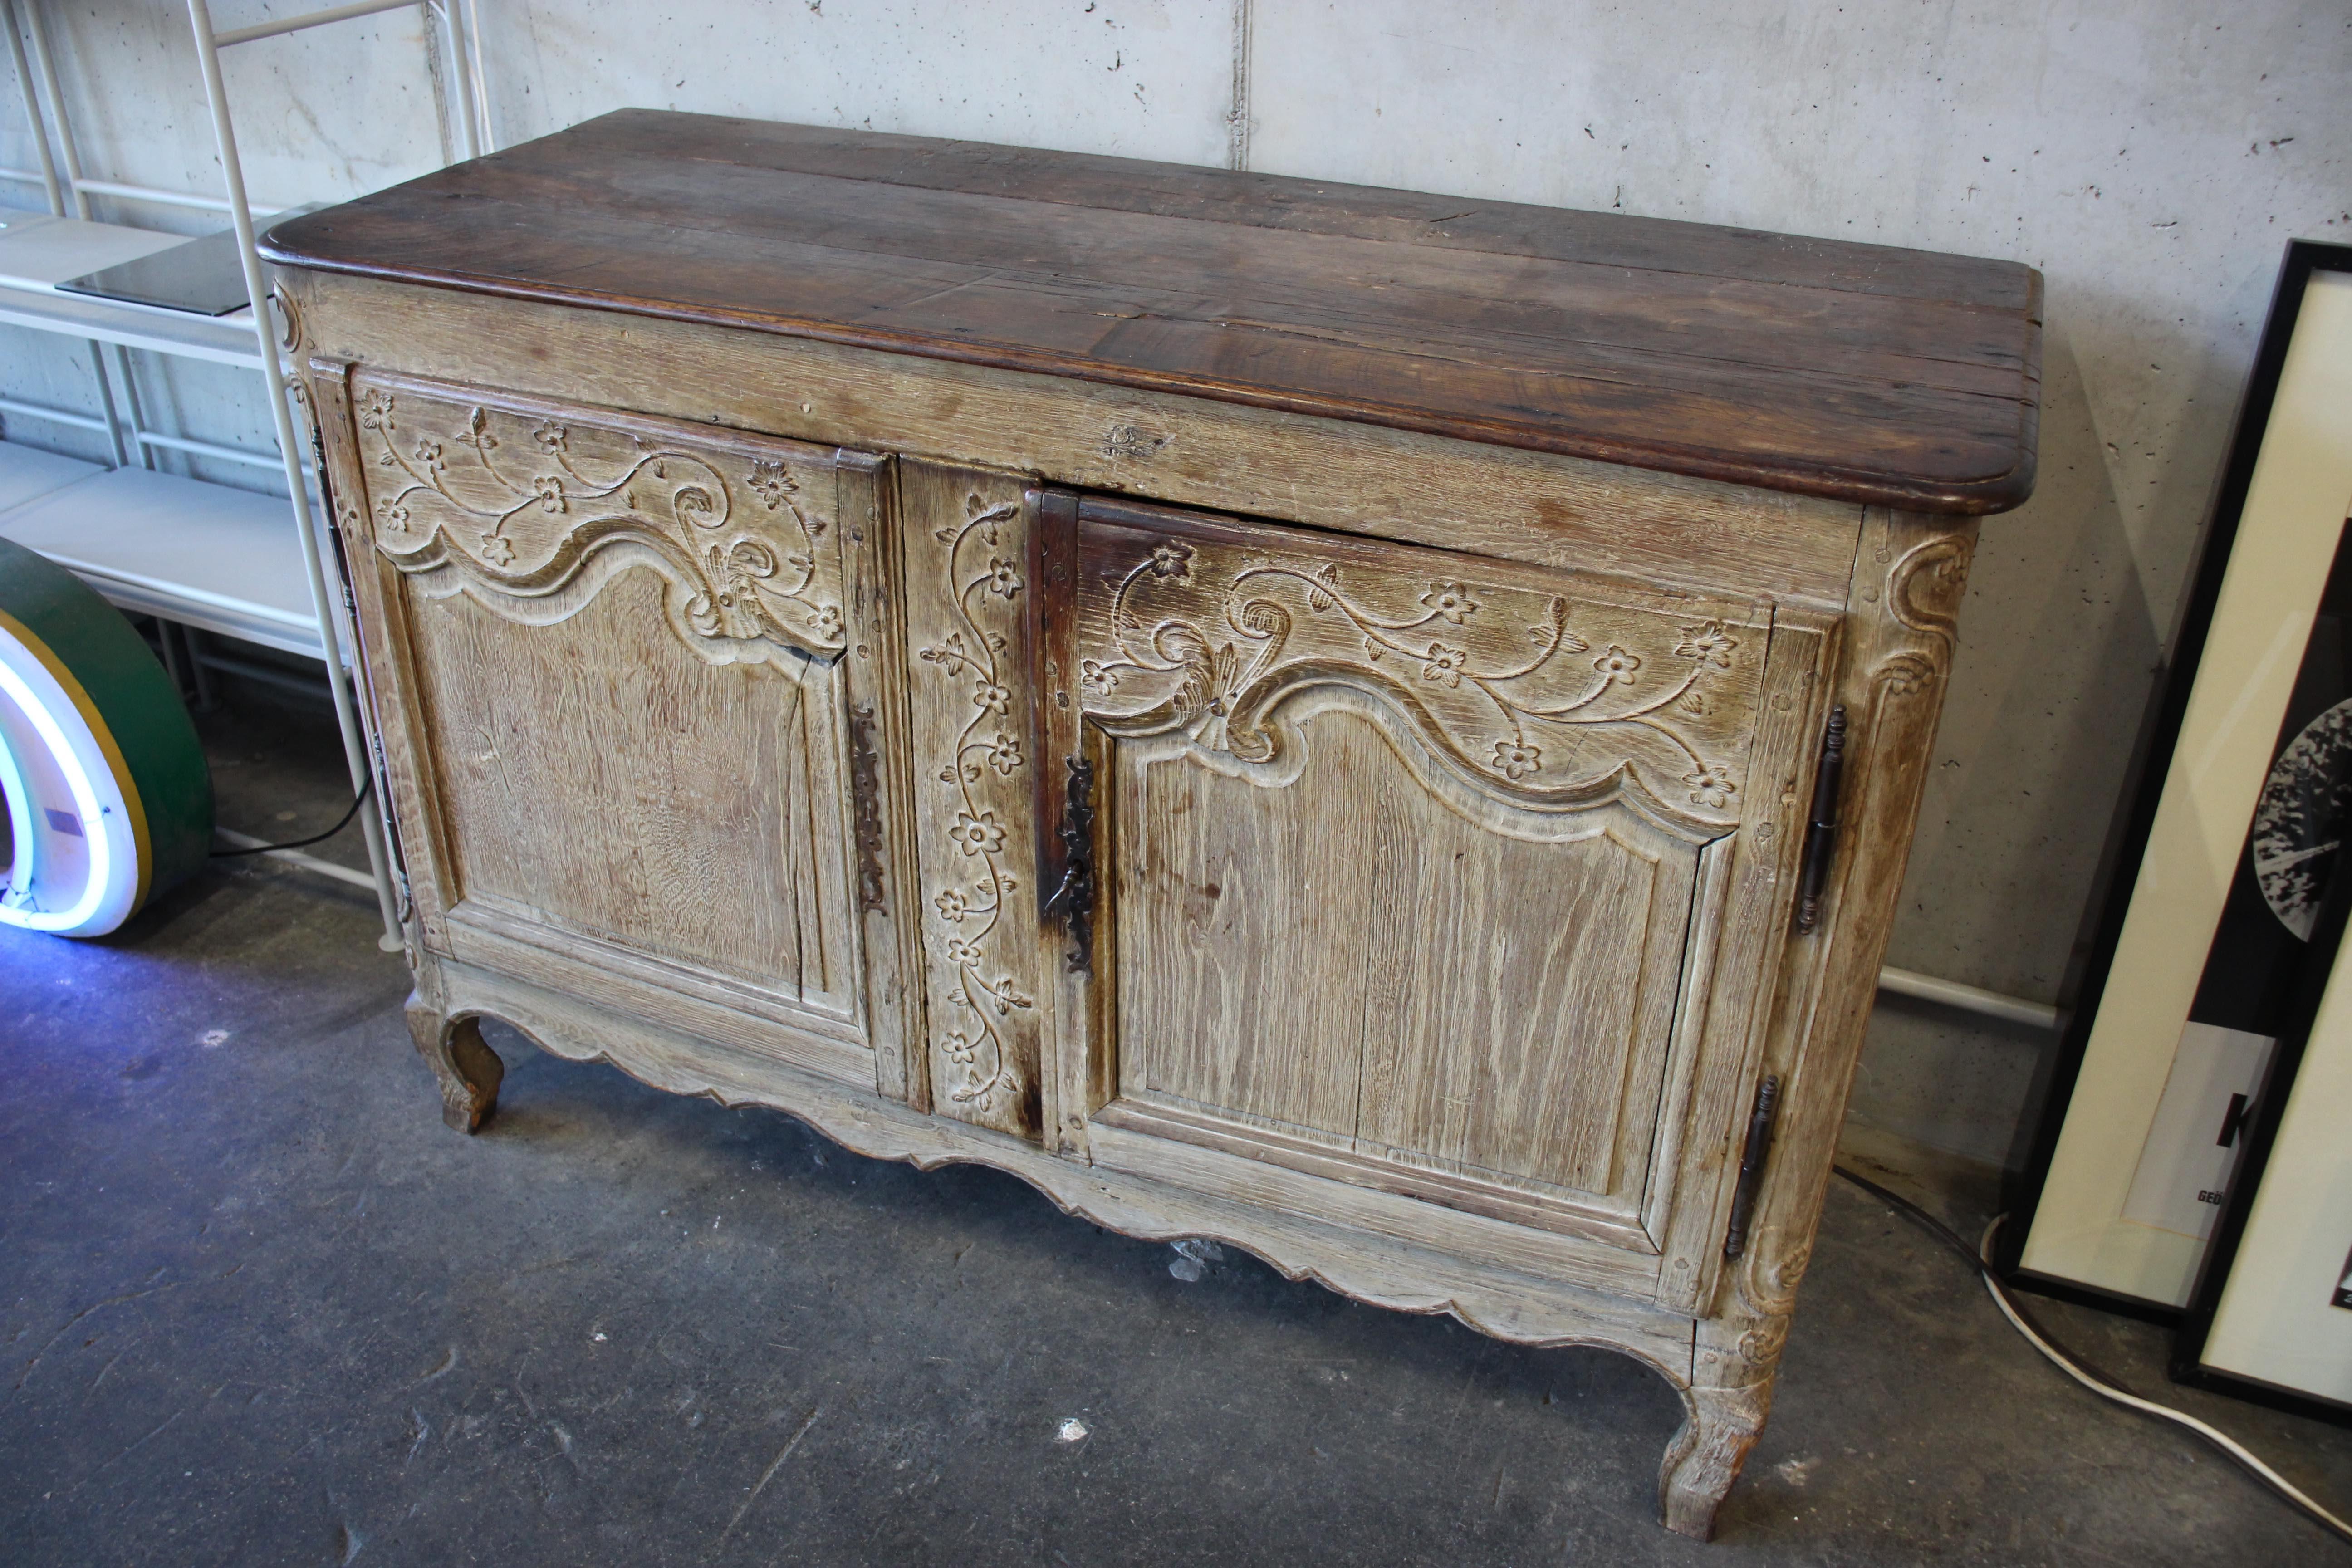 Hand-Painted French 18th Century Baroque Commode, European Wooden Buffet with Floral Ornament